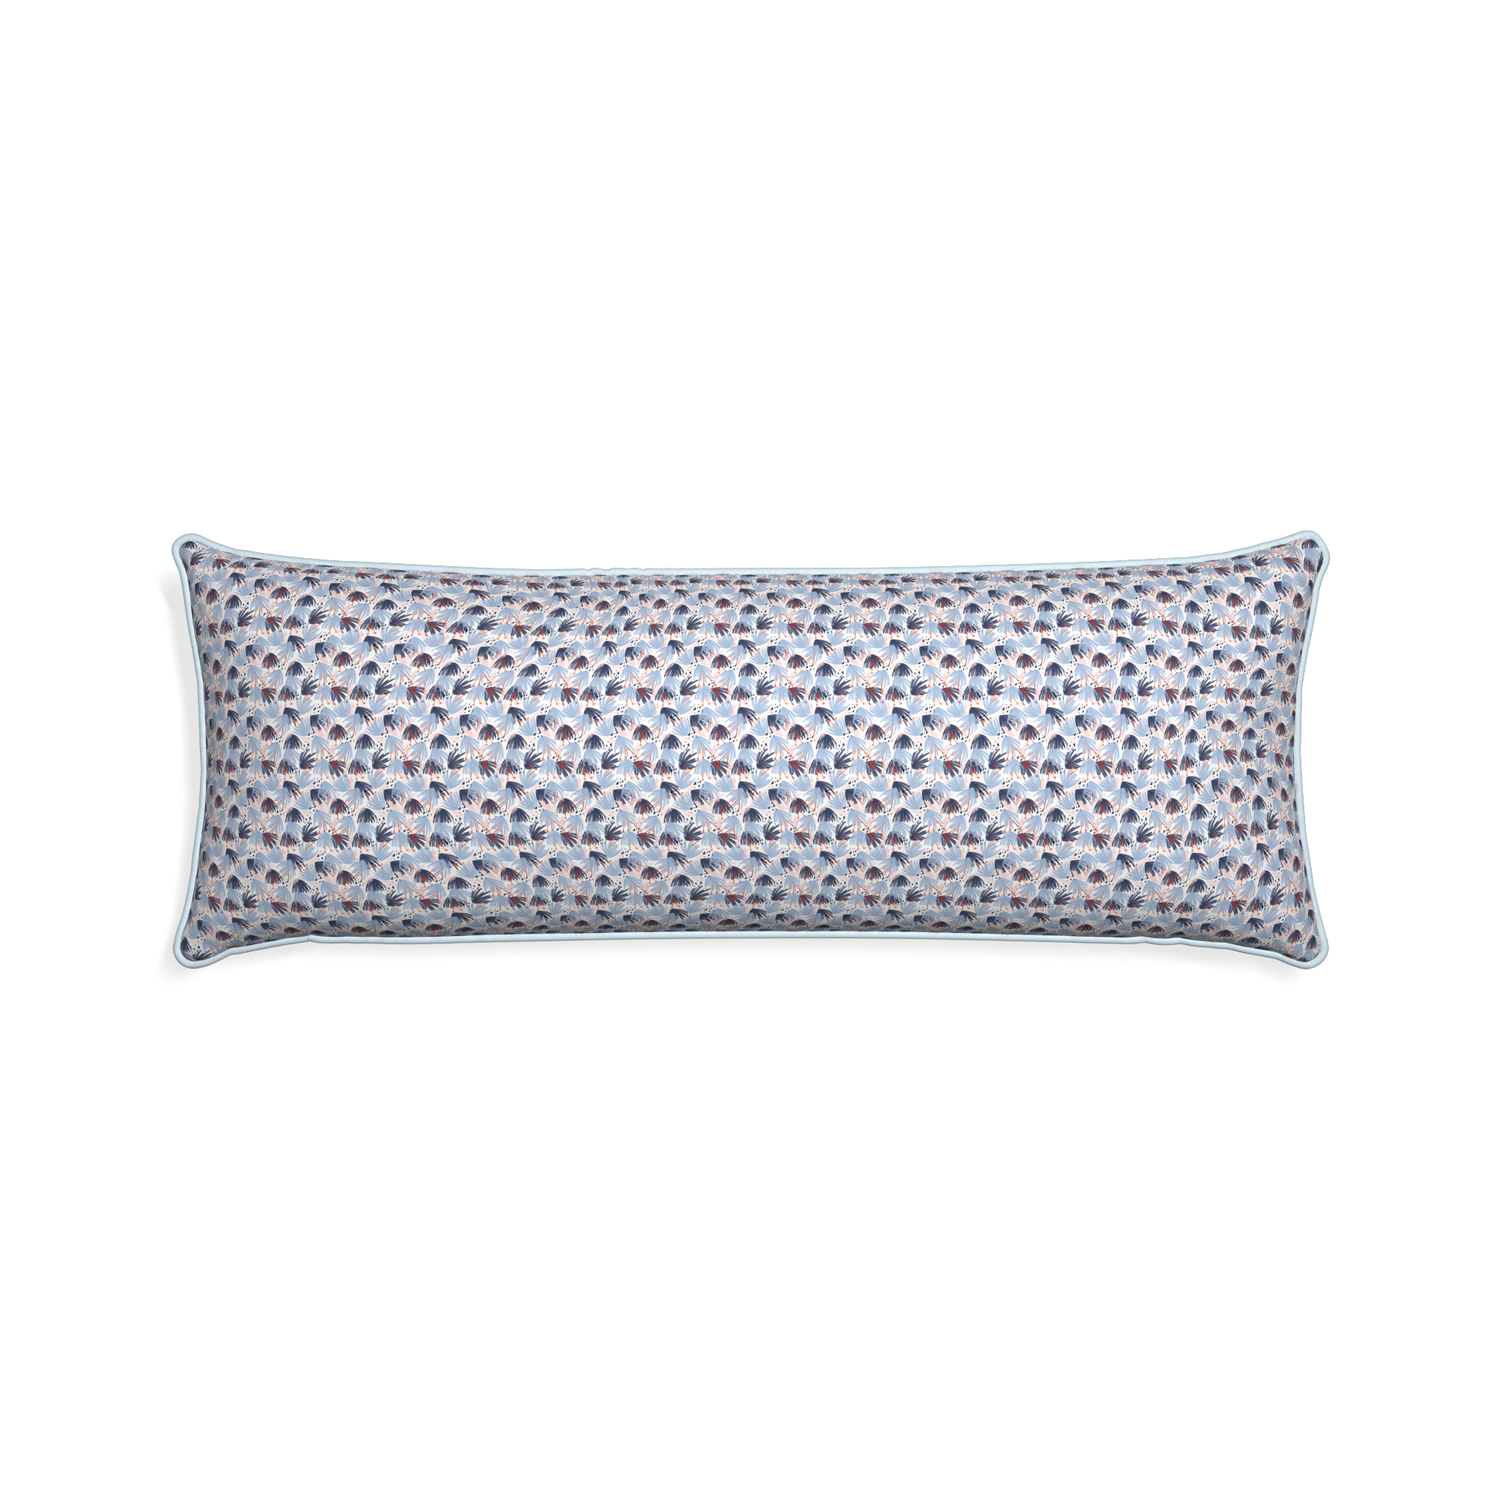 Xl-lumbar eden blue custom pillow with powder piping on white background